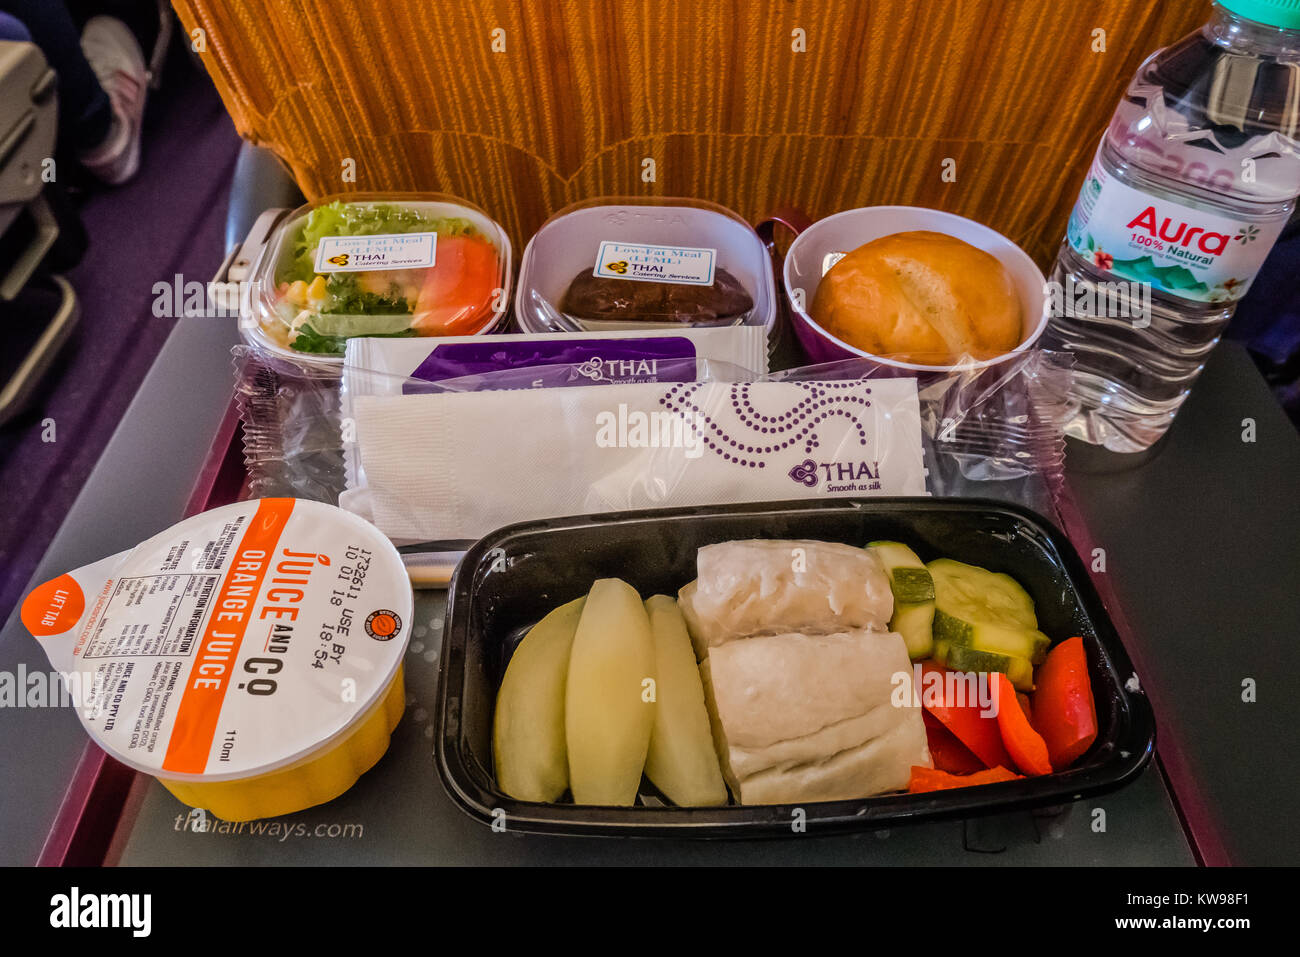 Low Fat heathy Airline meal Stockfoto